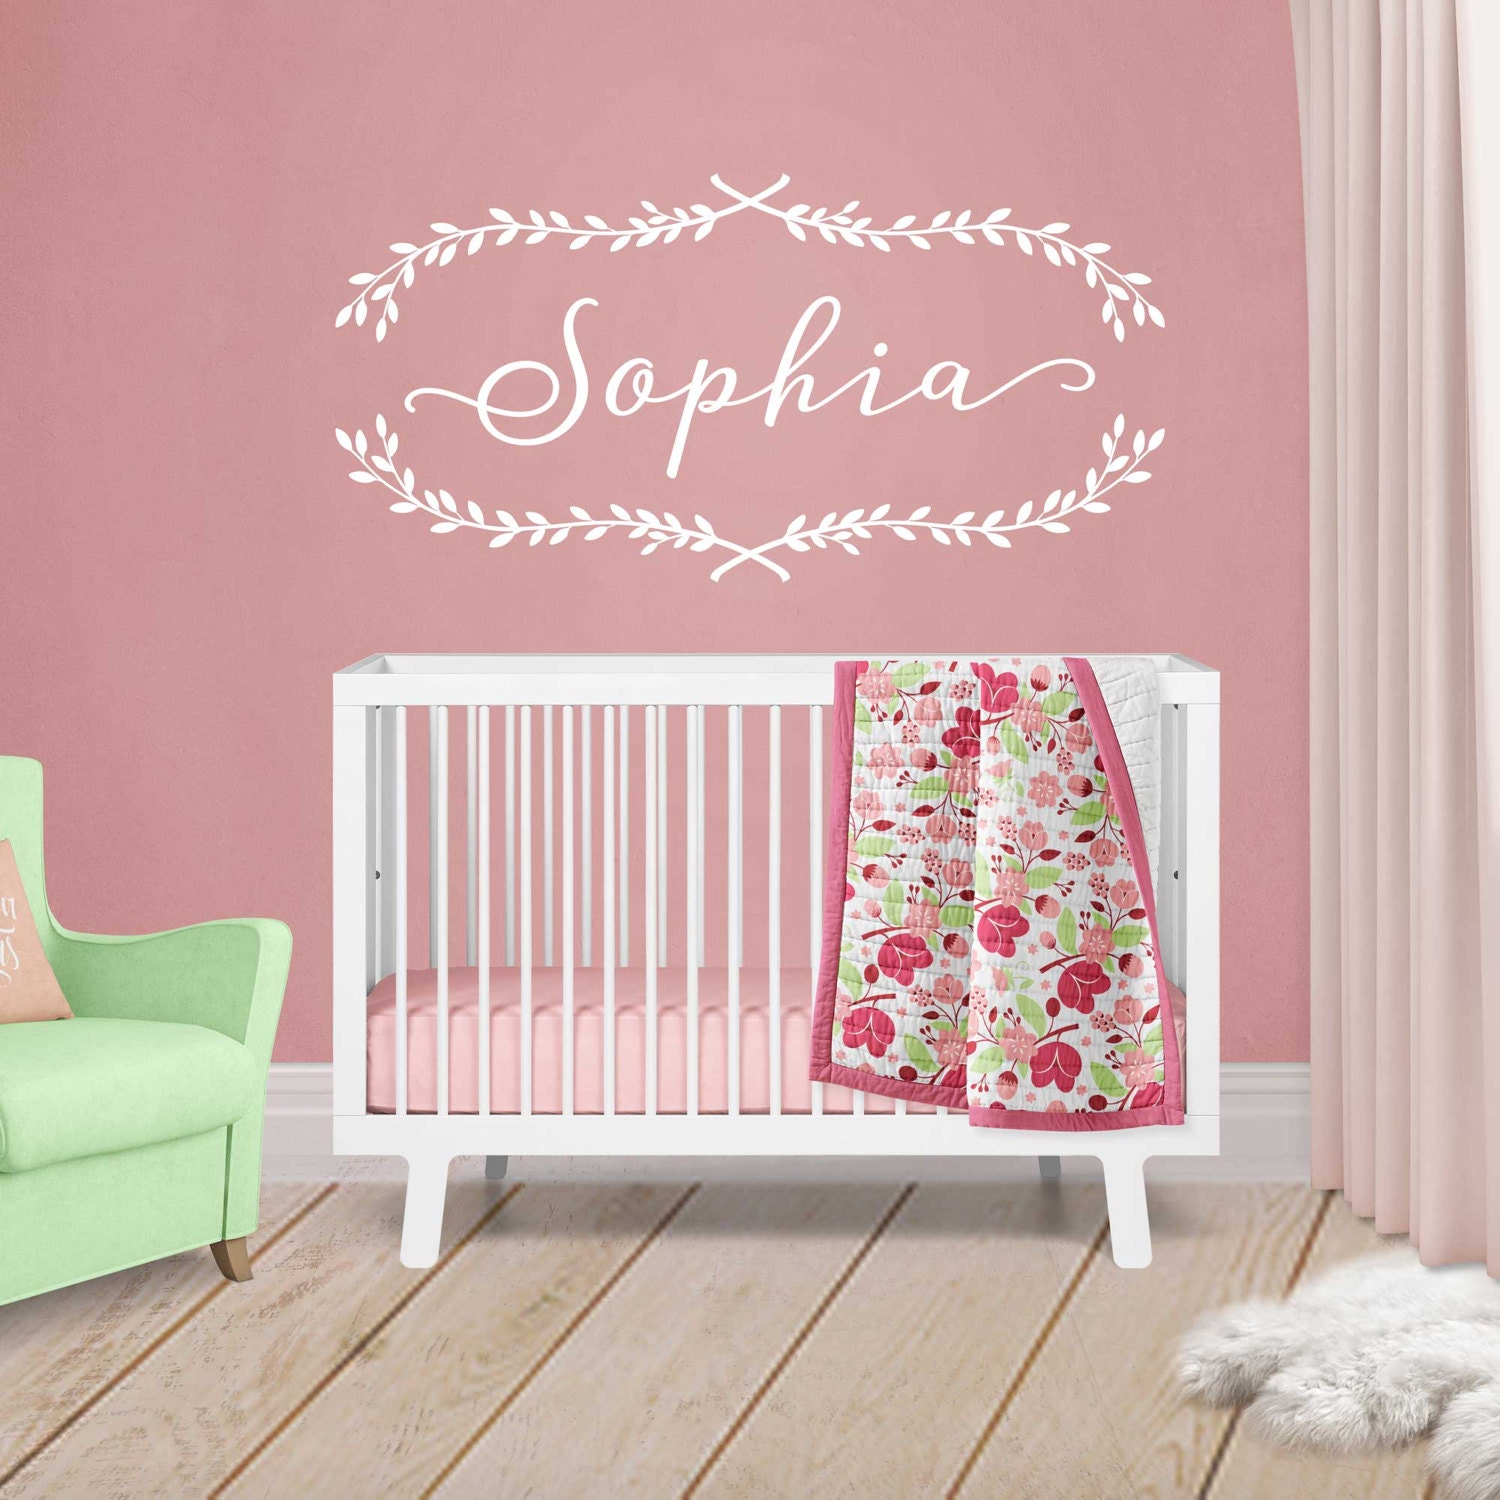 Custom Name Decals for Nursery with Laurel Leaves Wreath